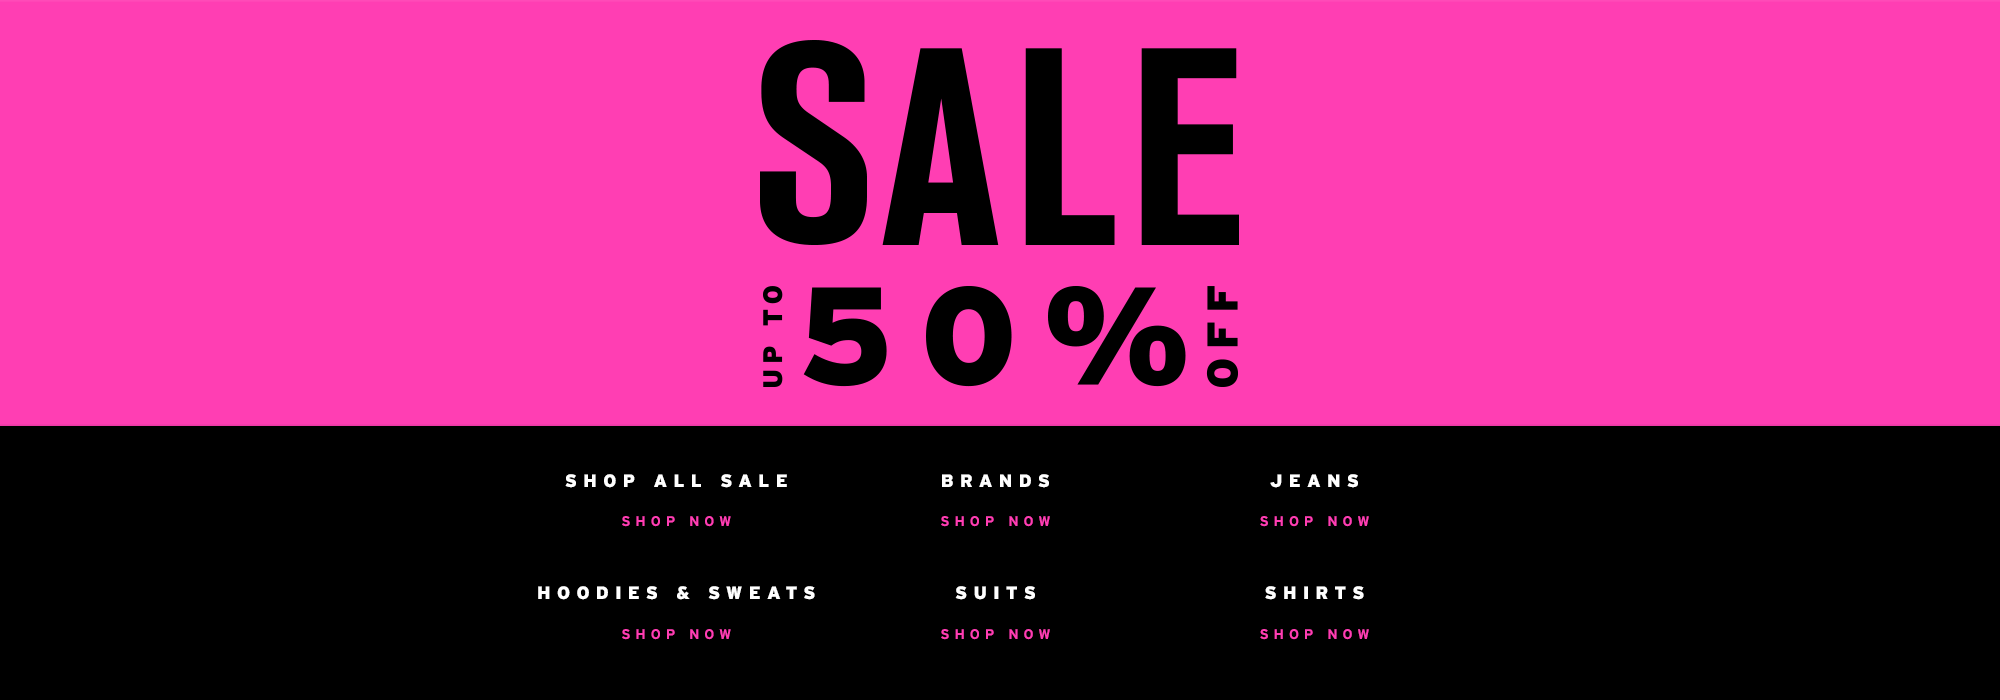 Topman: Sale up to 50% off men's fashion